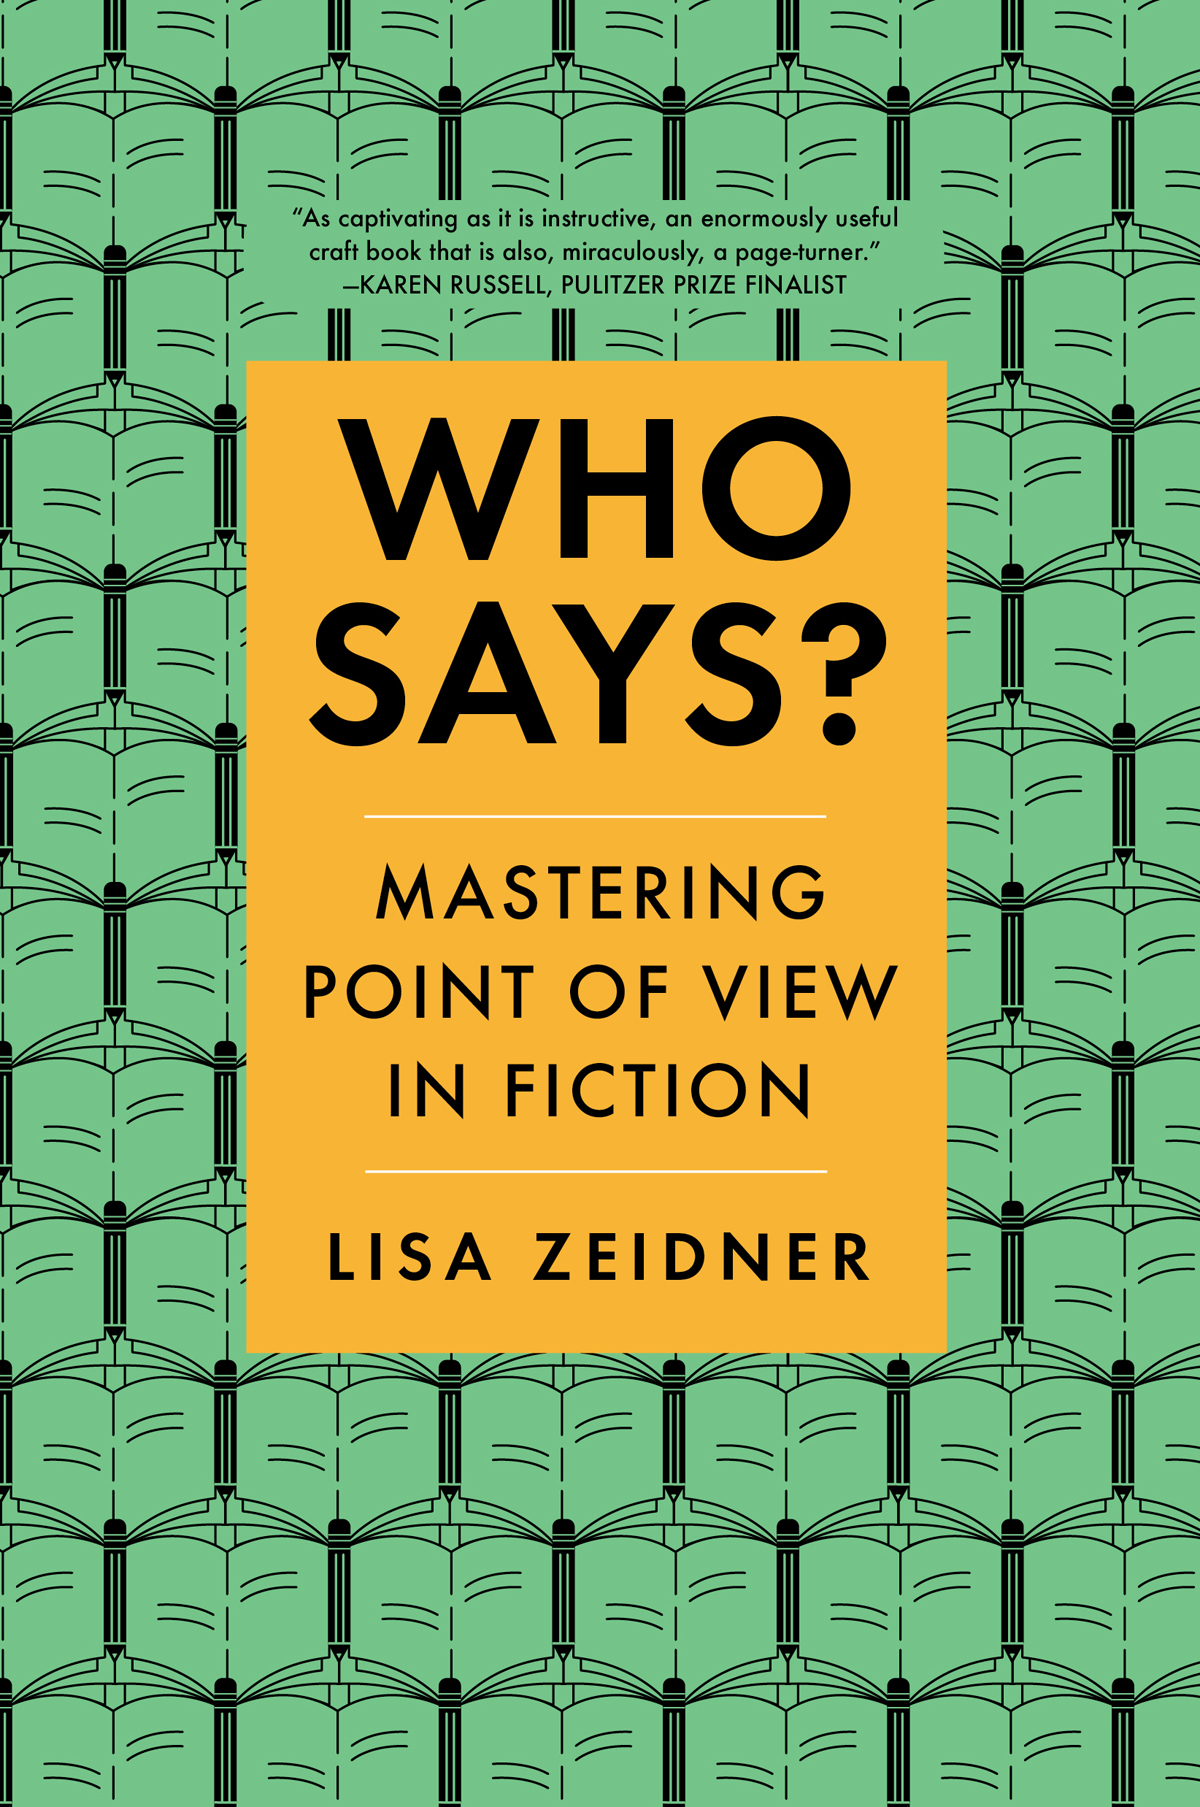 WHO SAYS MASTERING POINT OF VIEW IN FICTION LISA ZEIDNER FOR JOHN CONTENTS - photo 1